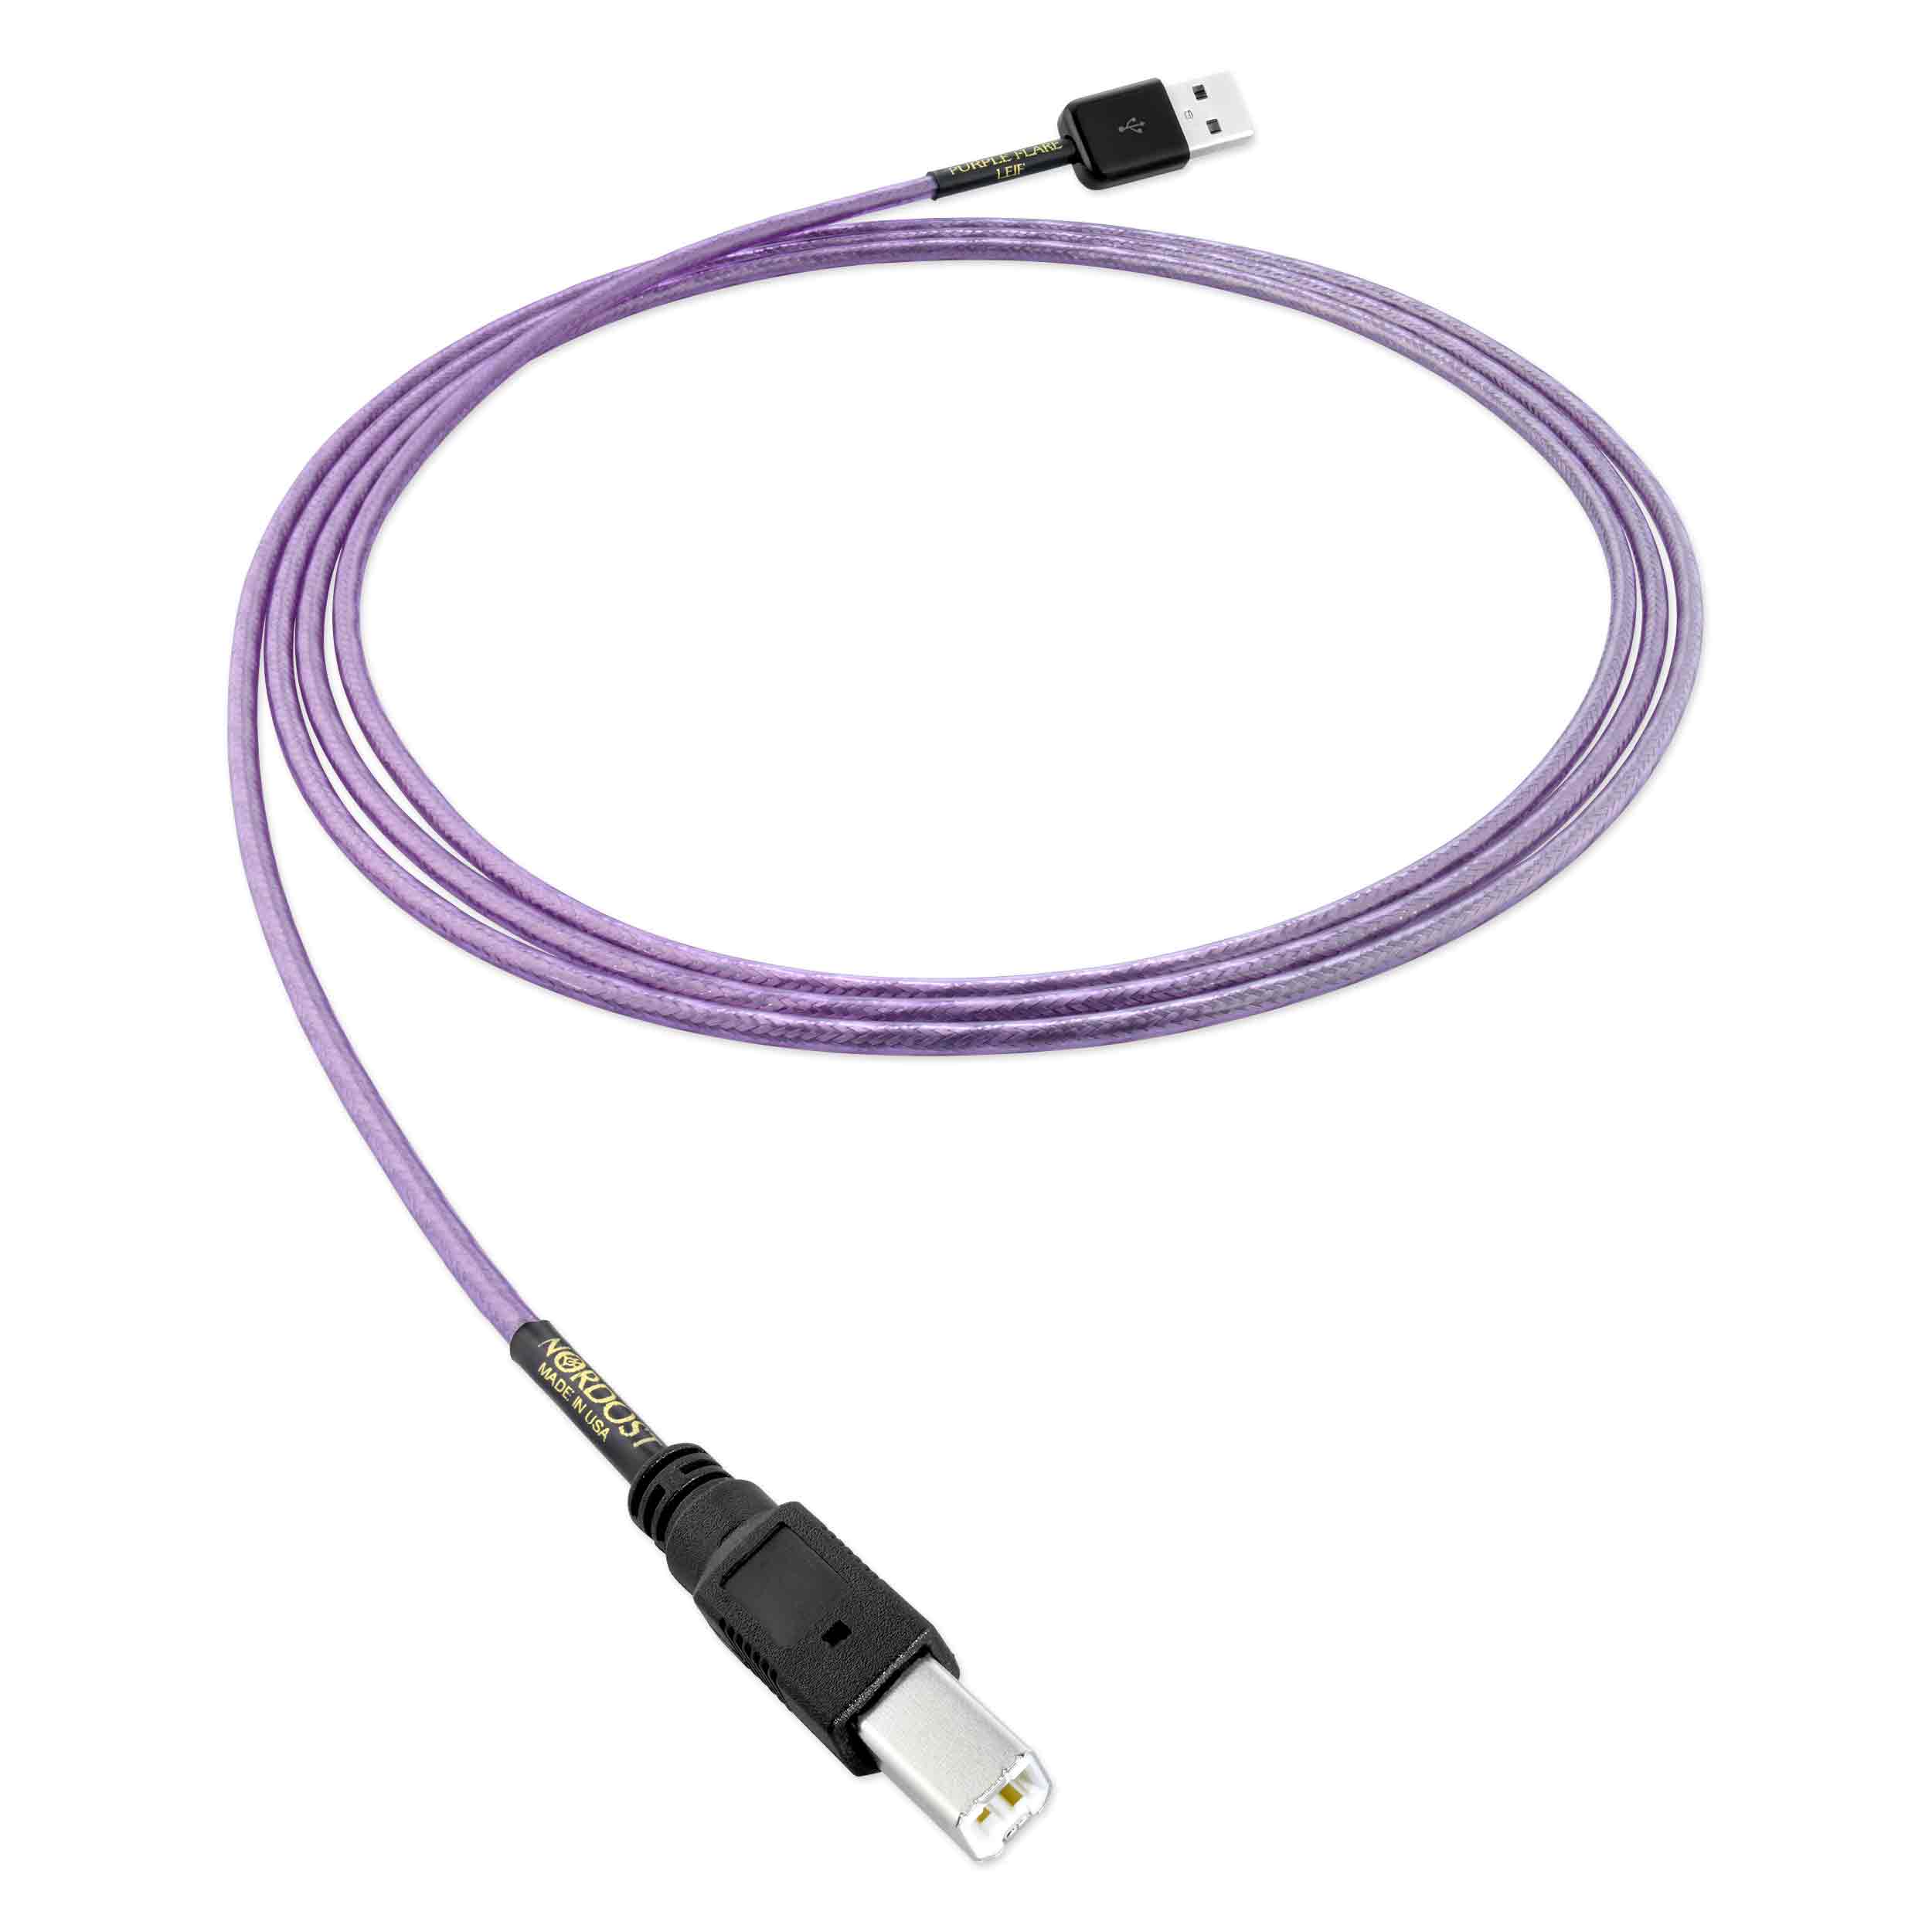 Dây USB 2.0 Nordost Leif Series Purple Flare